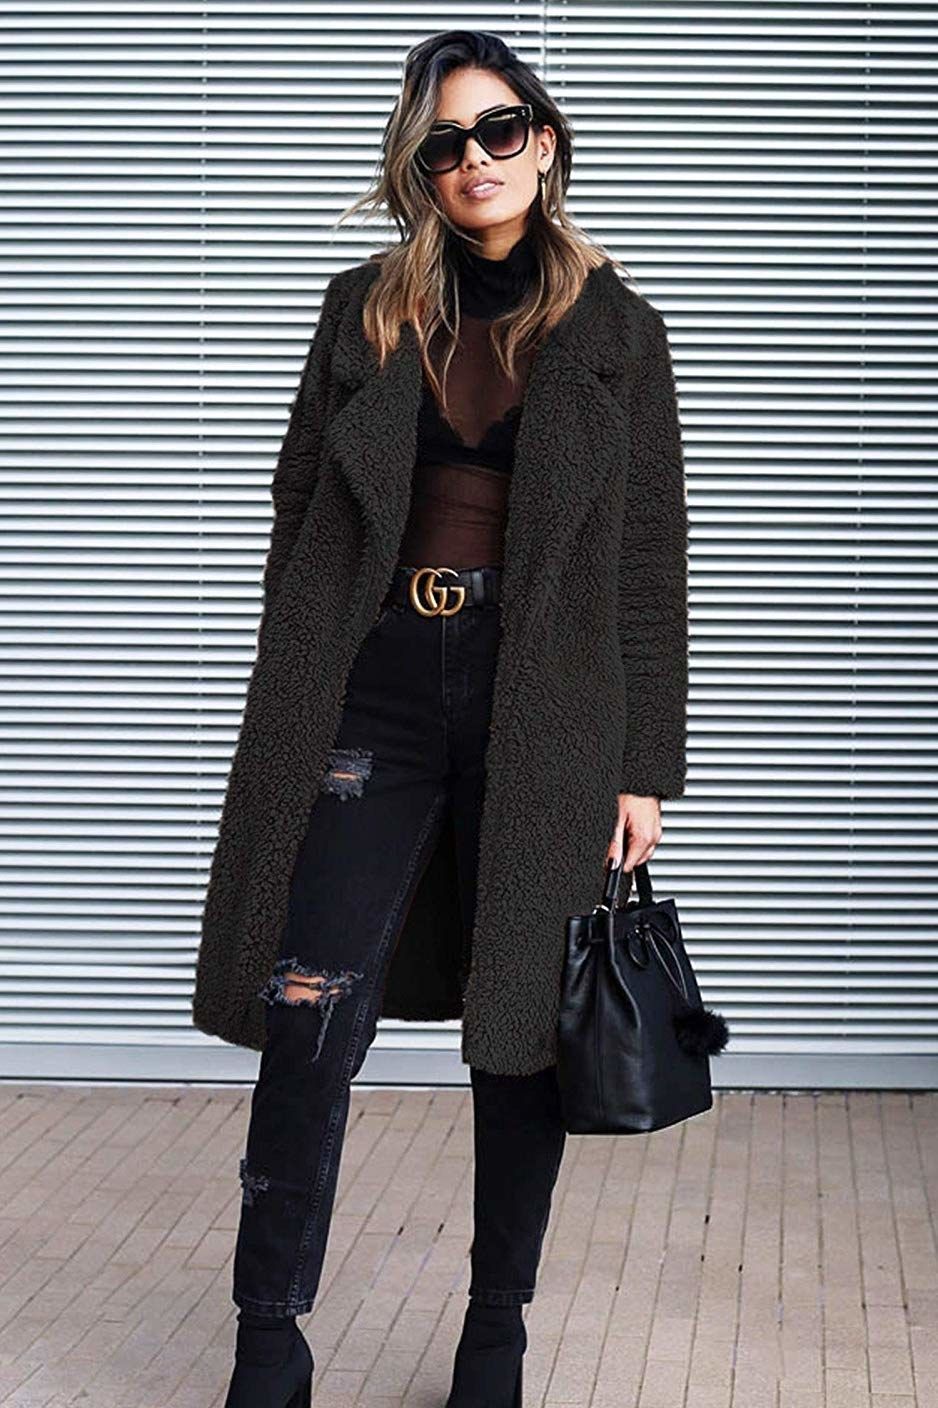 Leather Ensembles For Your Winter Looks